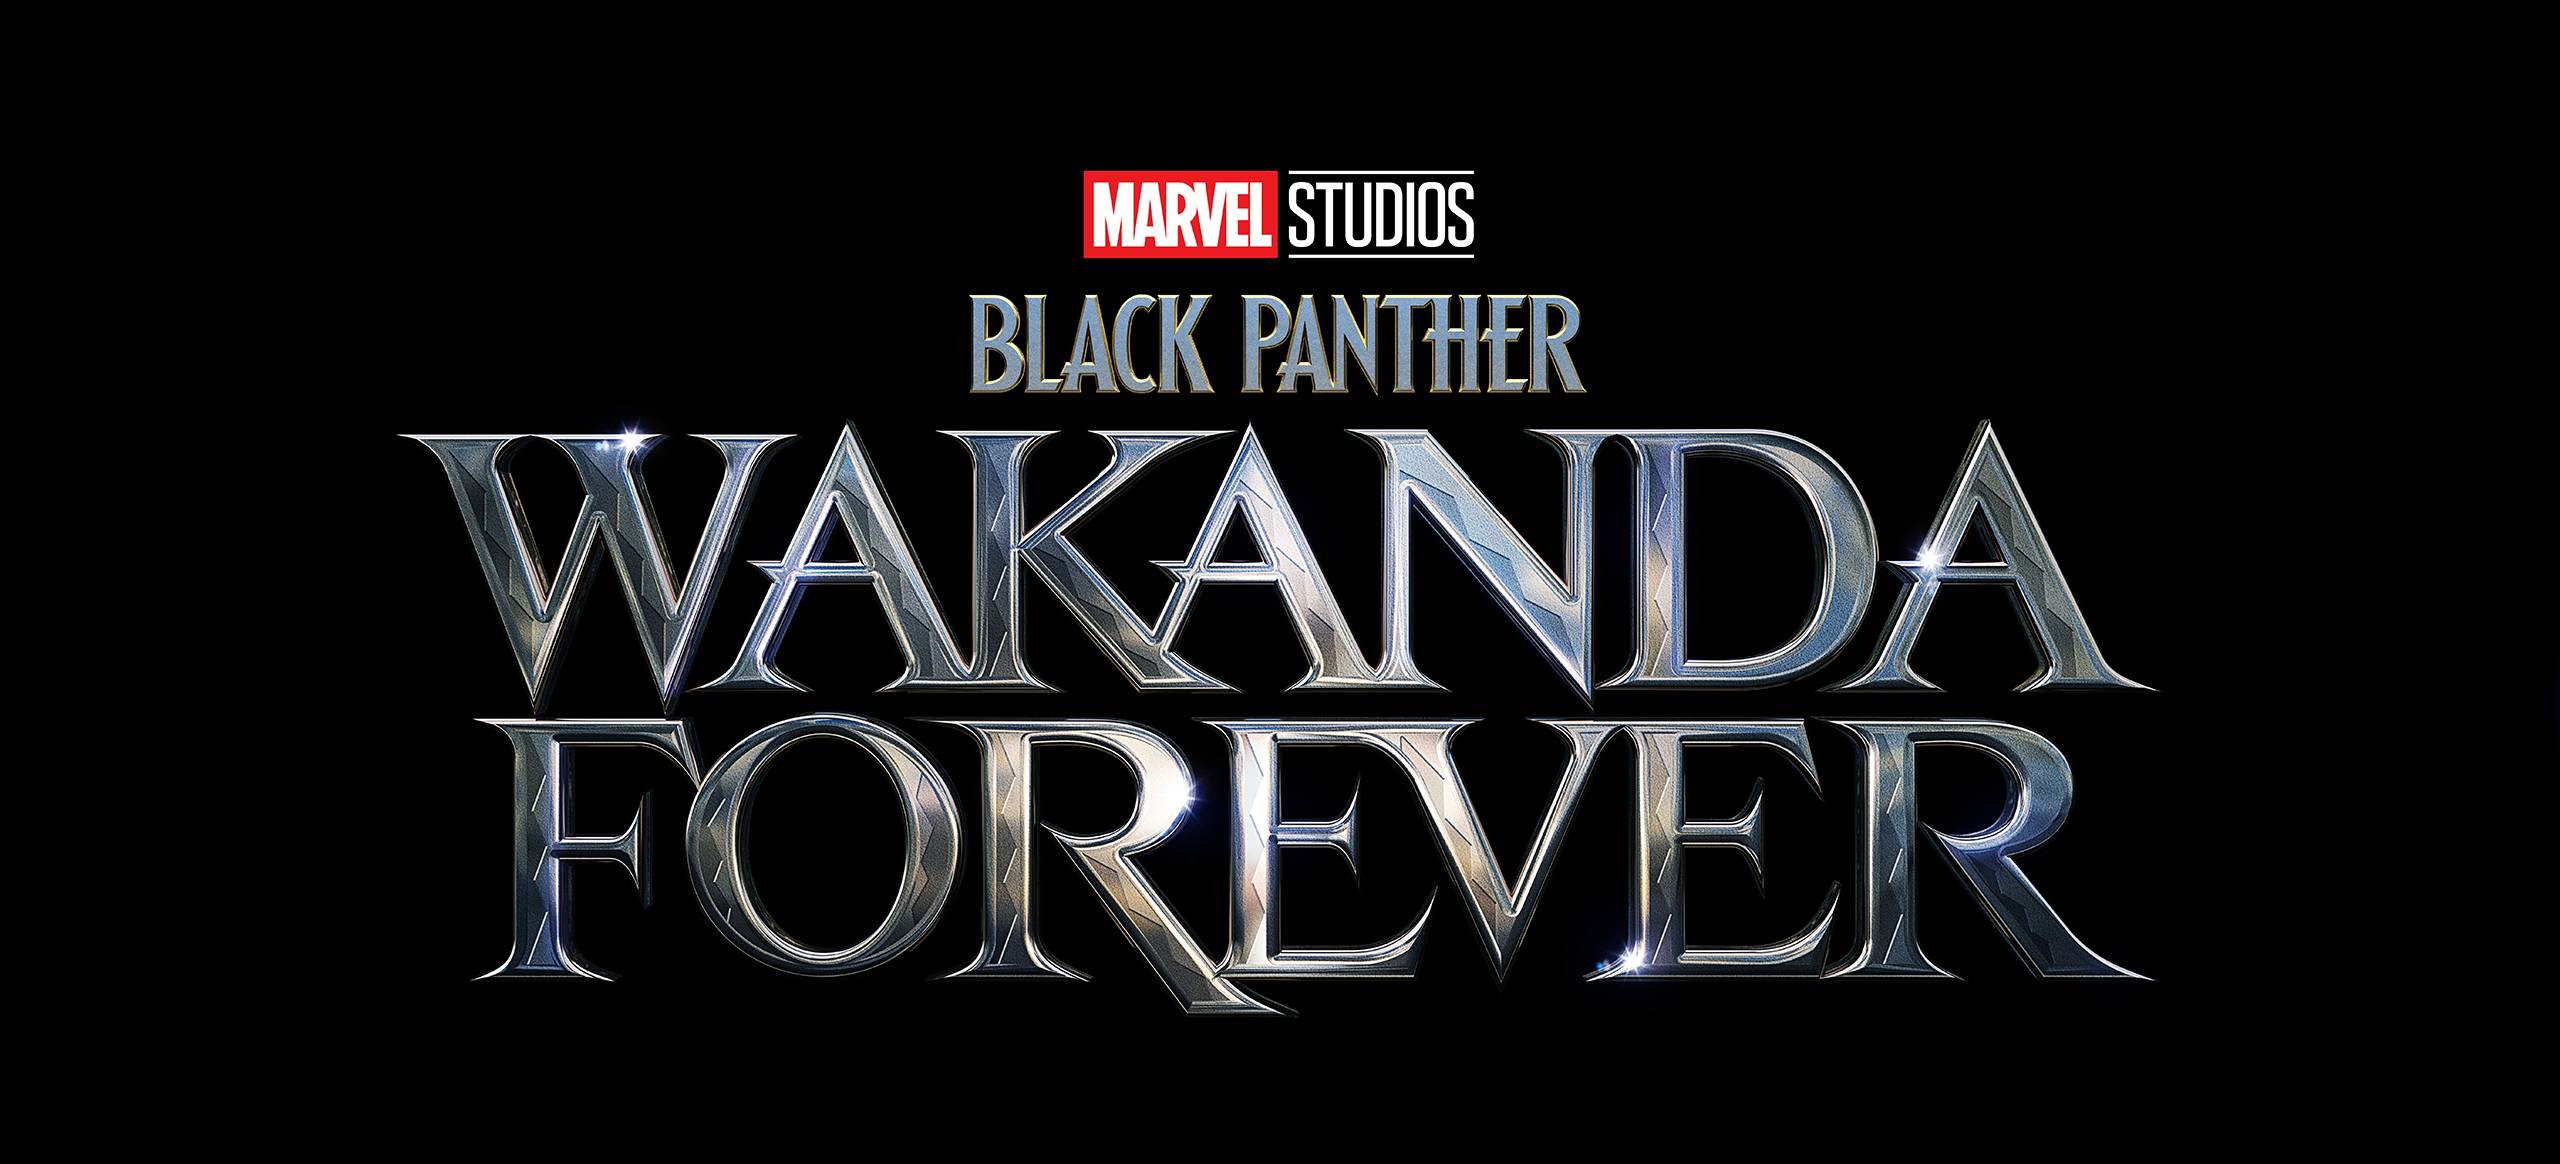 Marvel Studios' 'Black Panther: Wakanda Forever' to debut on Disney+ in February 2023